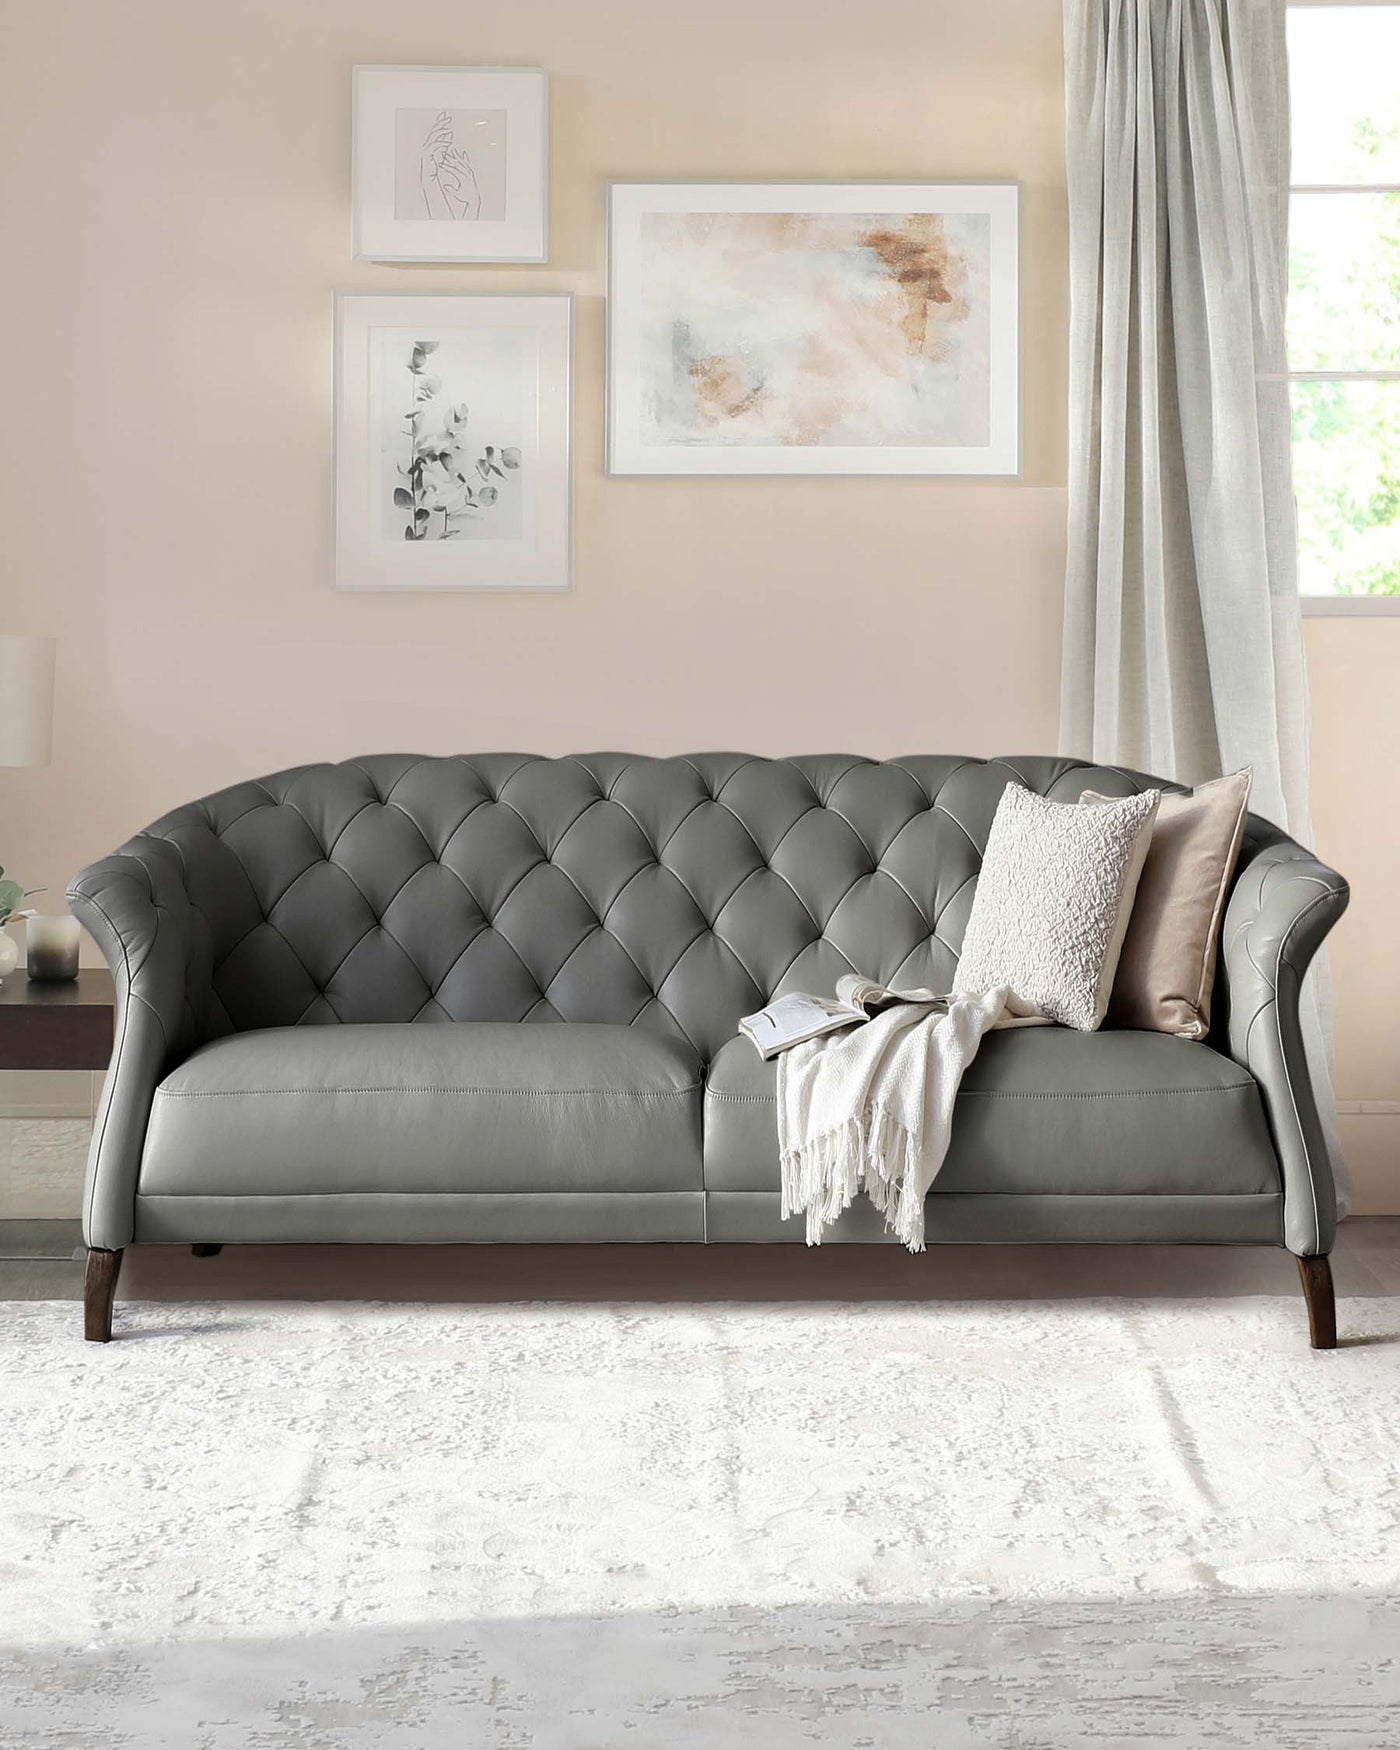 Elegant grey tufted chesterfield sofa with high rolled arms, deep button tufting, and dark wooden legs, adorned with two decorative pillows and a white throw blanket.